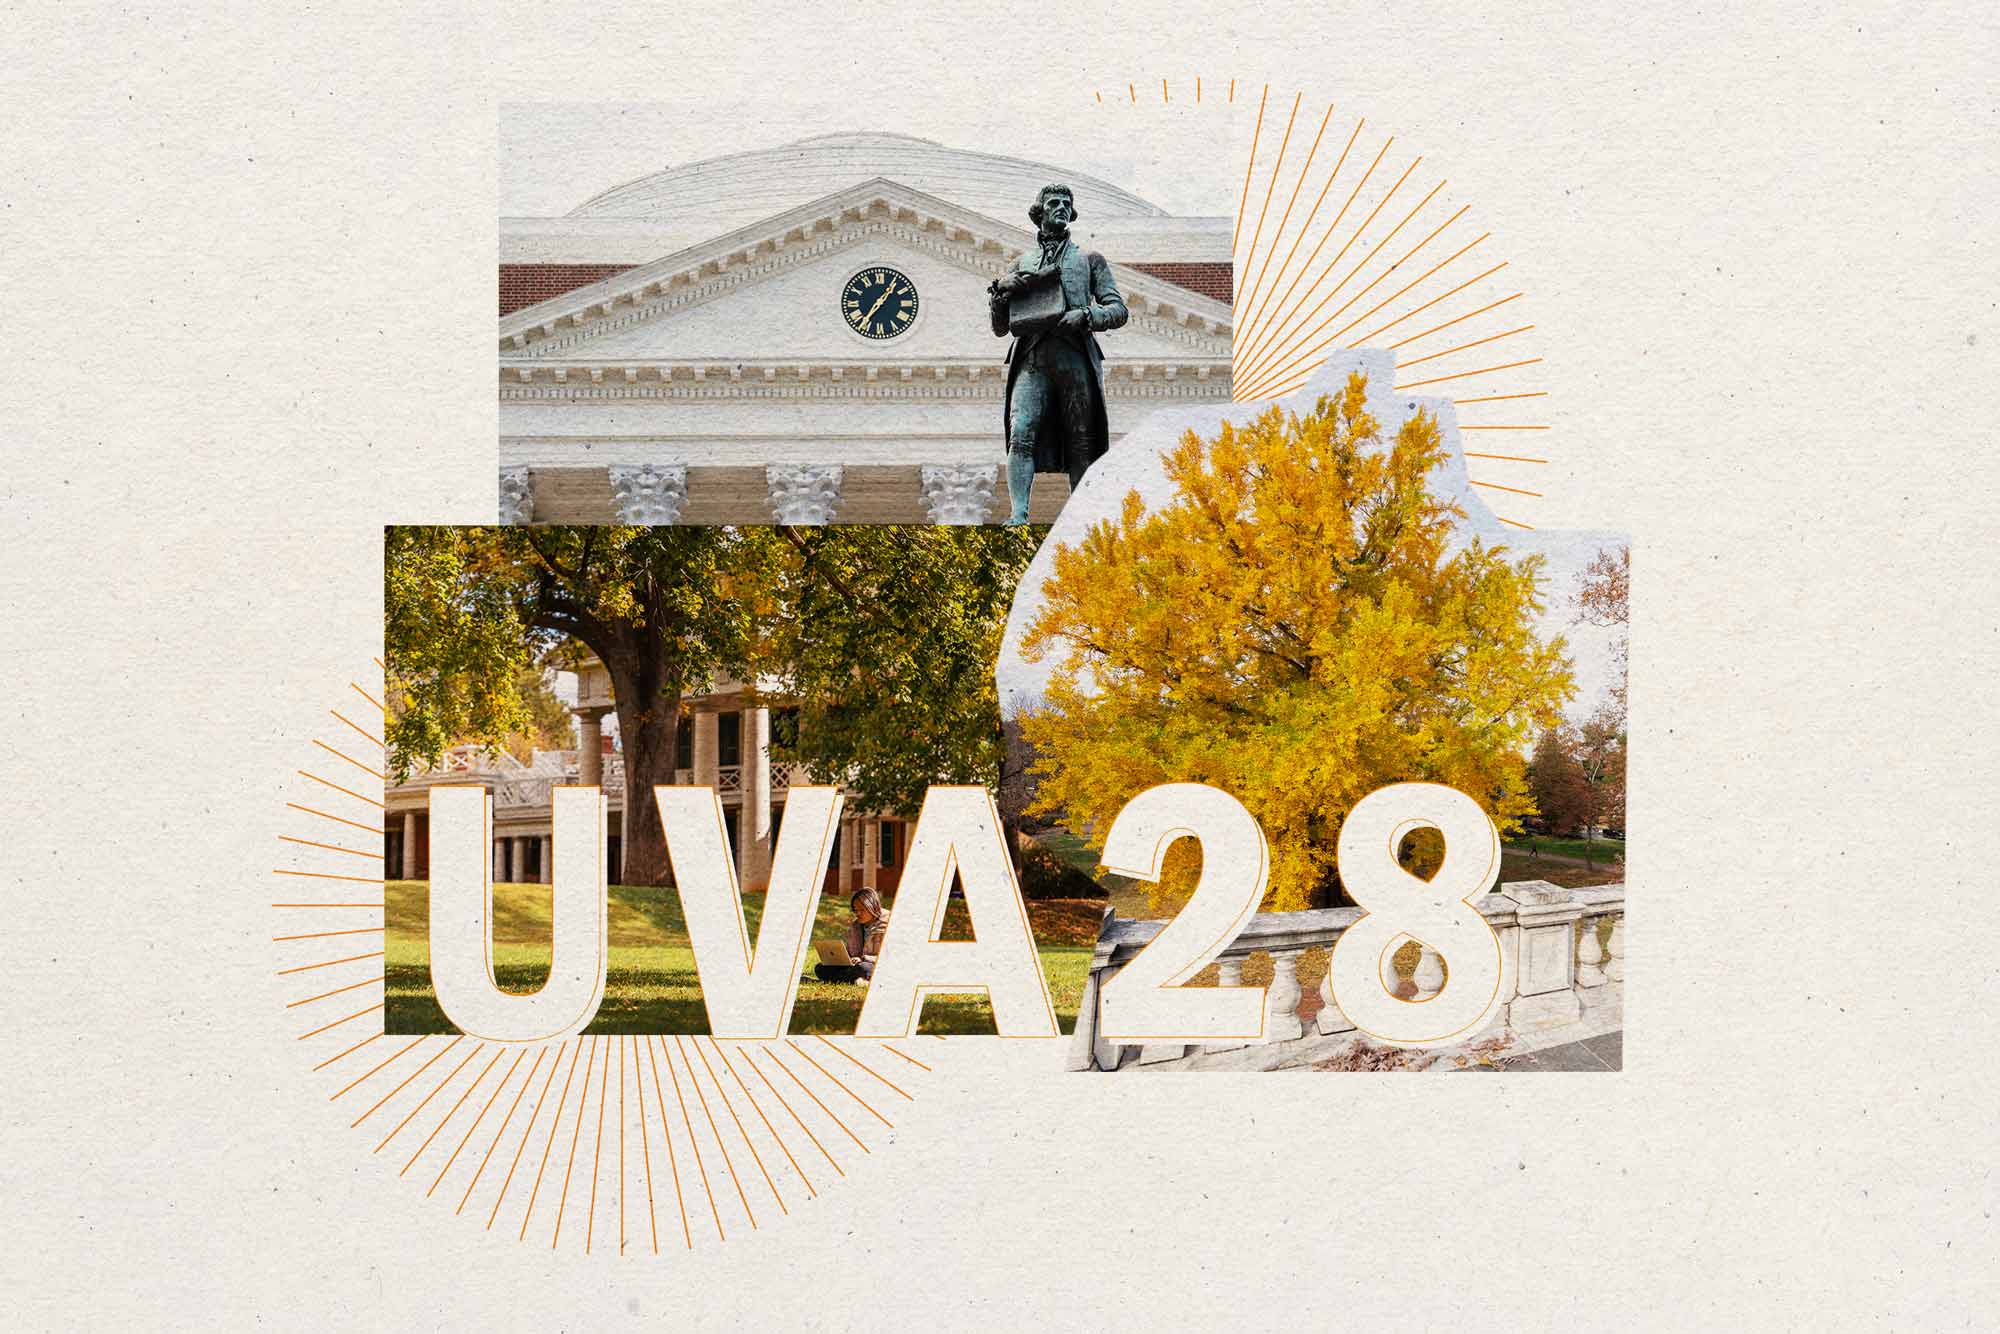 A collage of scenes from UVA and UVA 28 overlayed